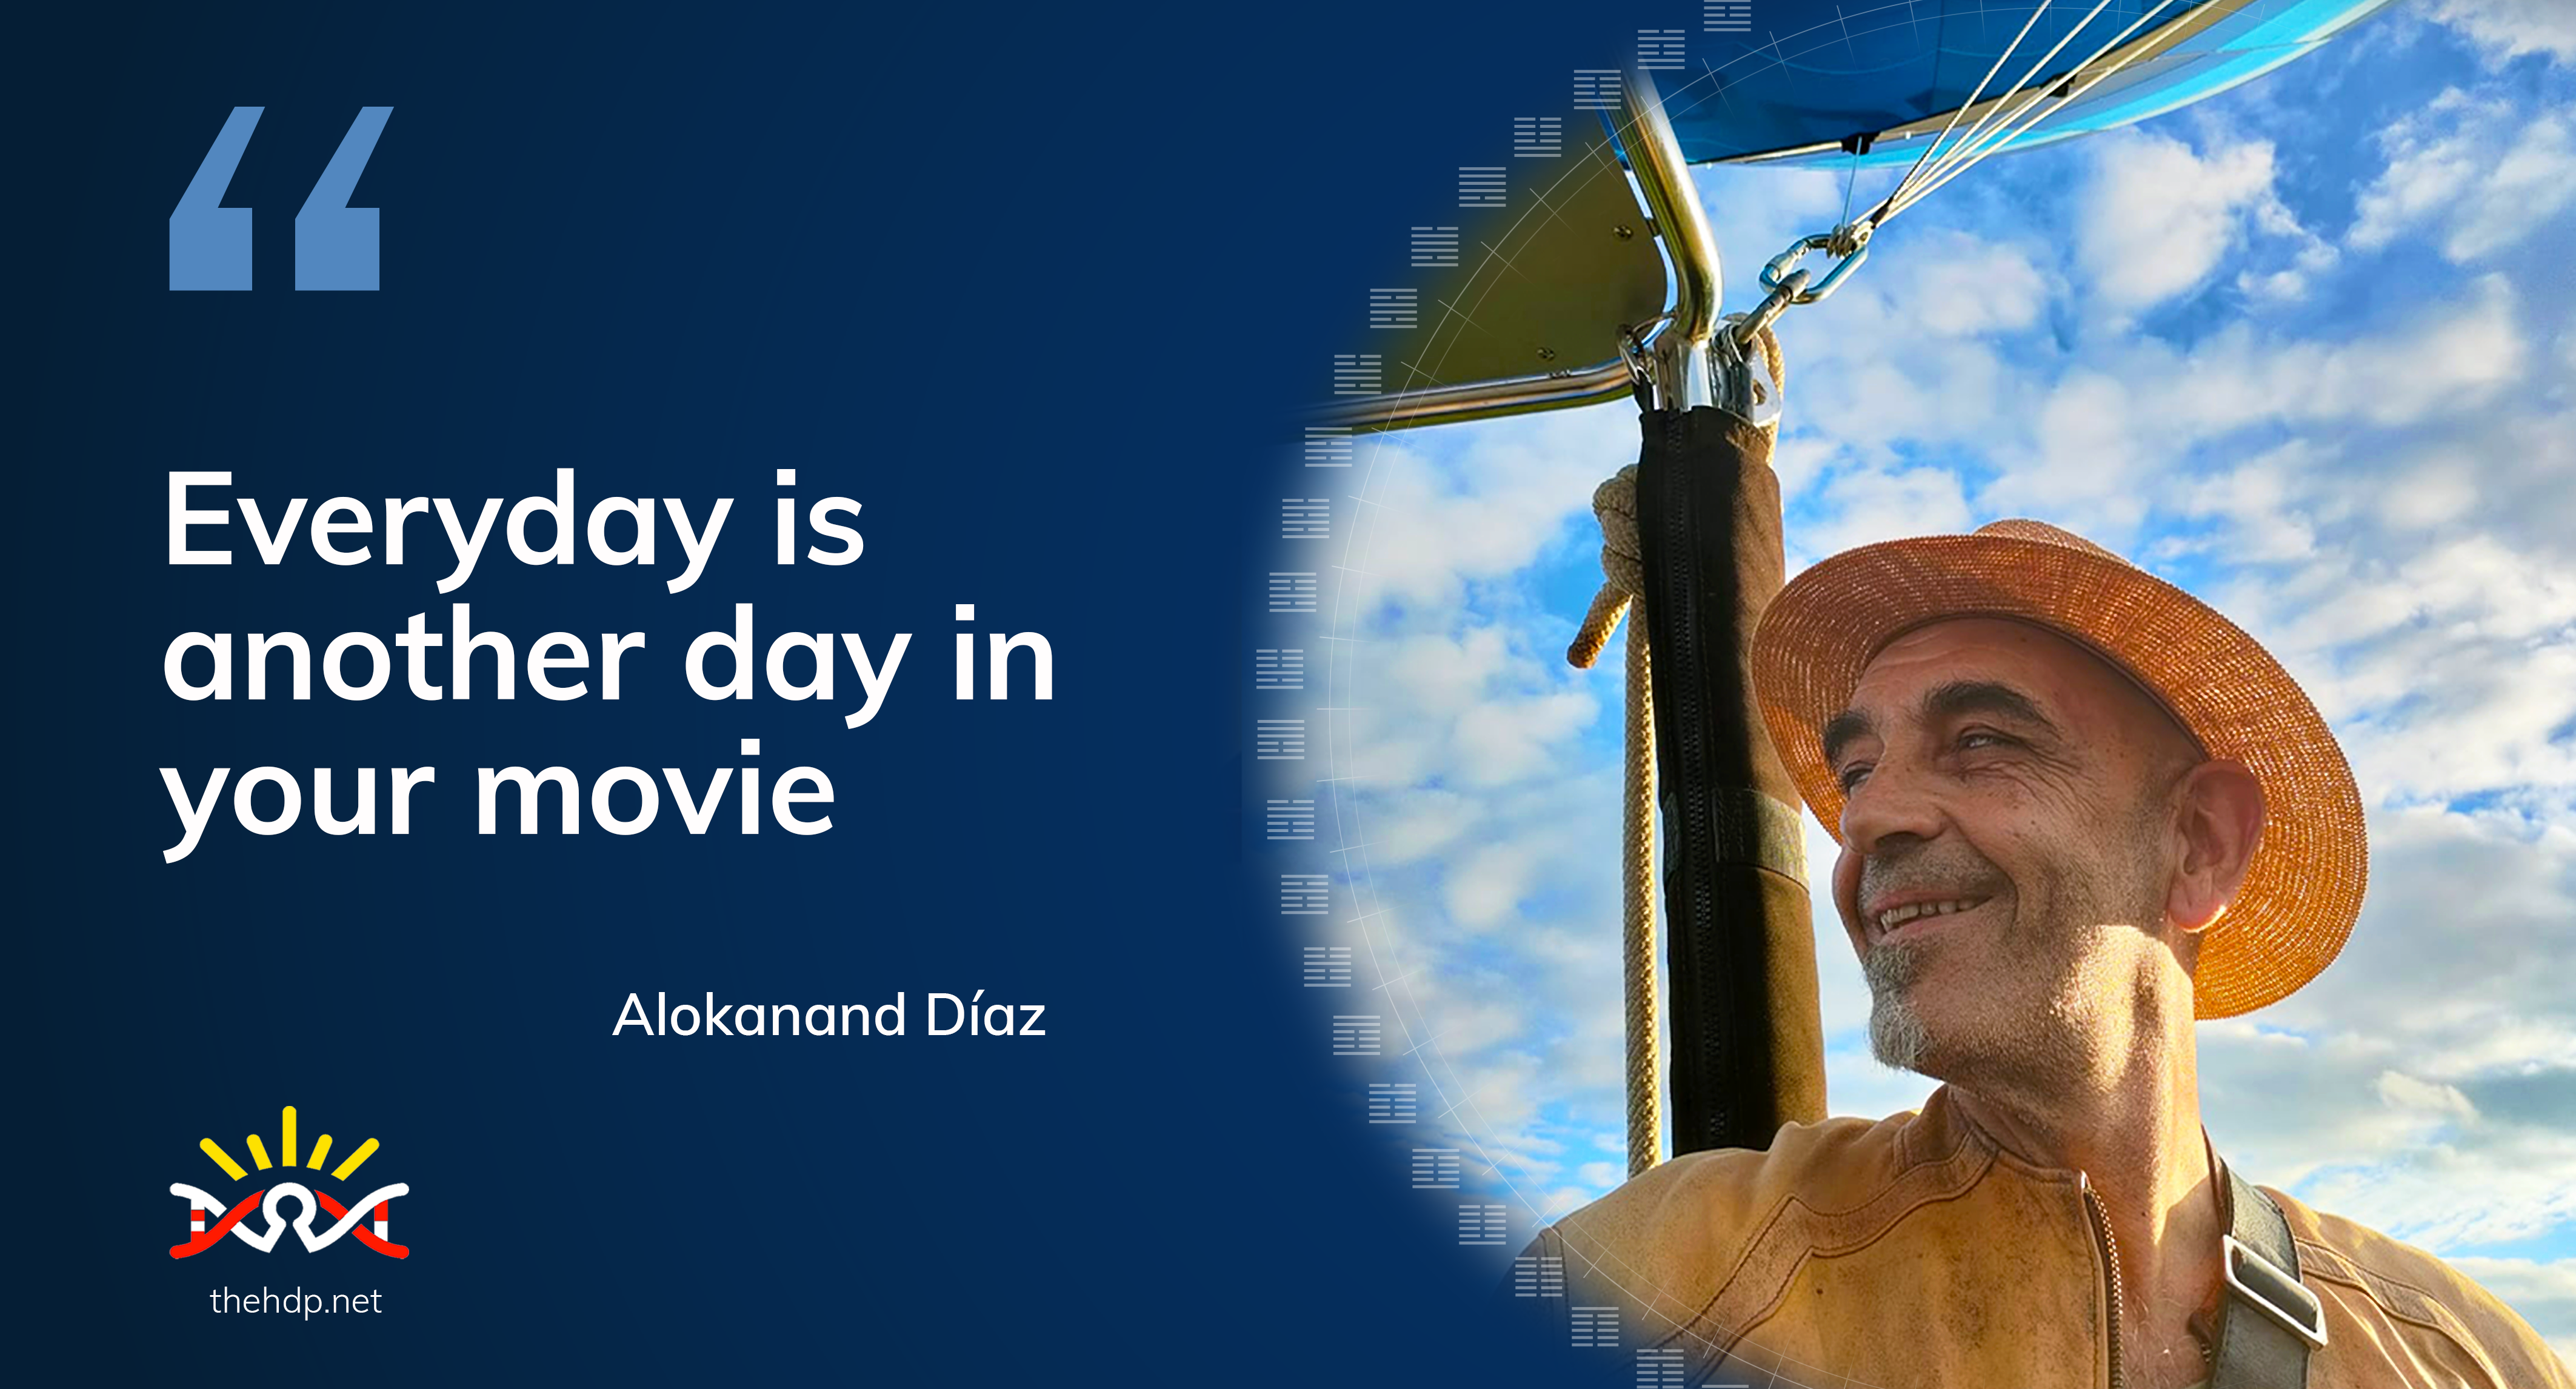 Alok's Quotes / Your Movie